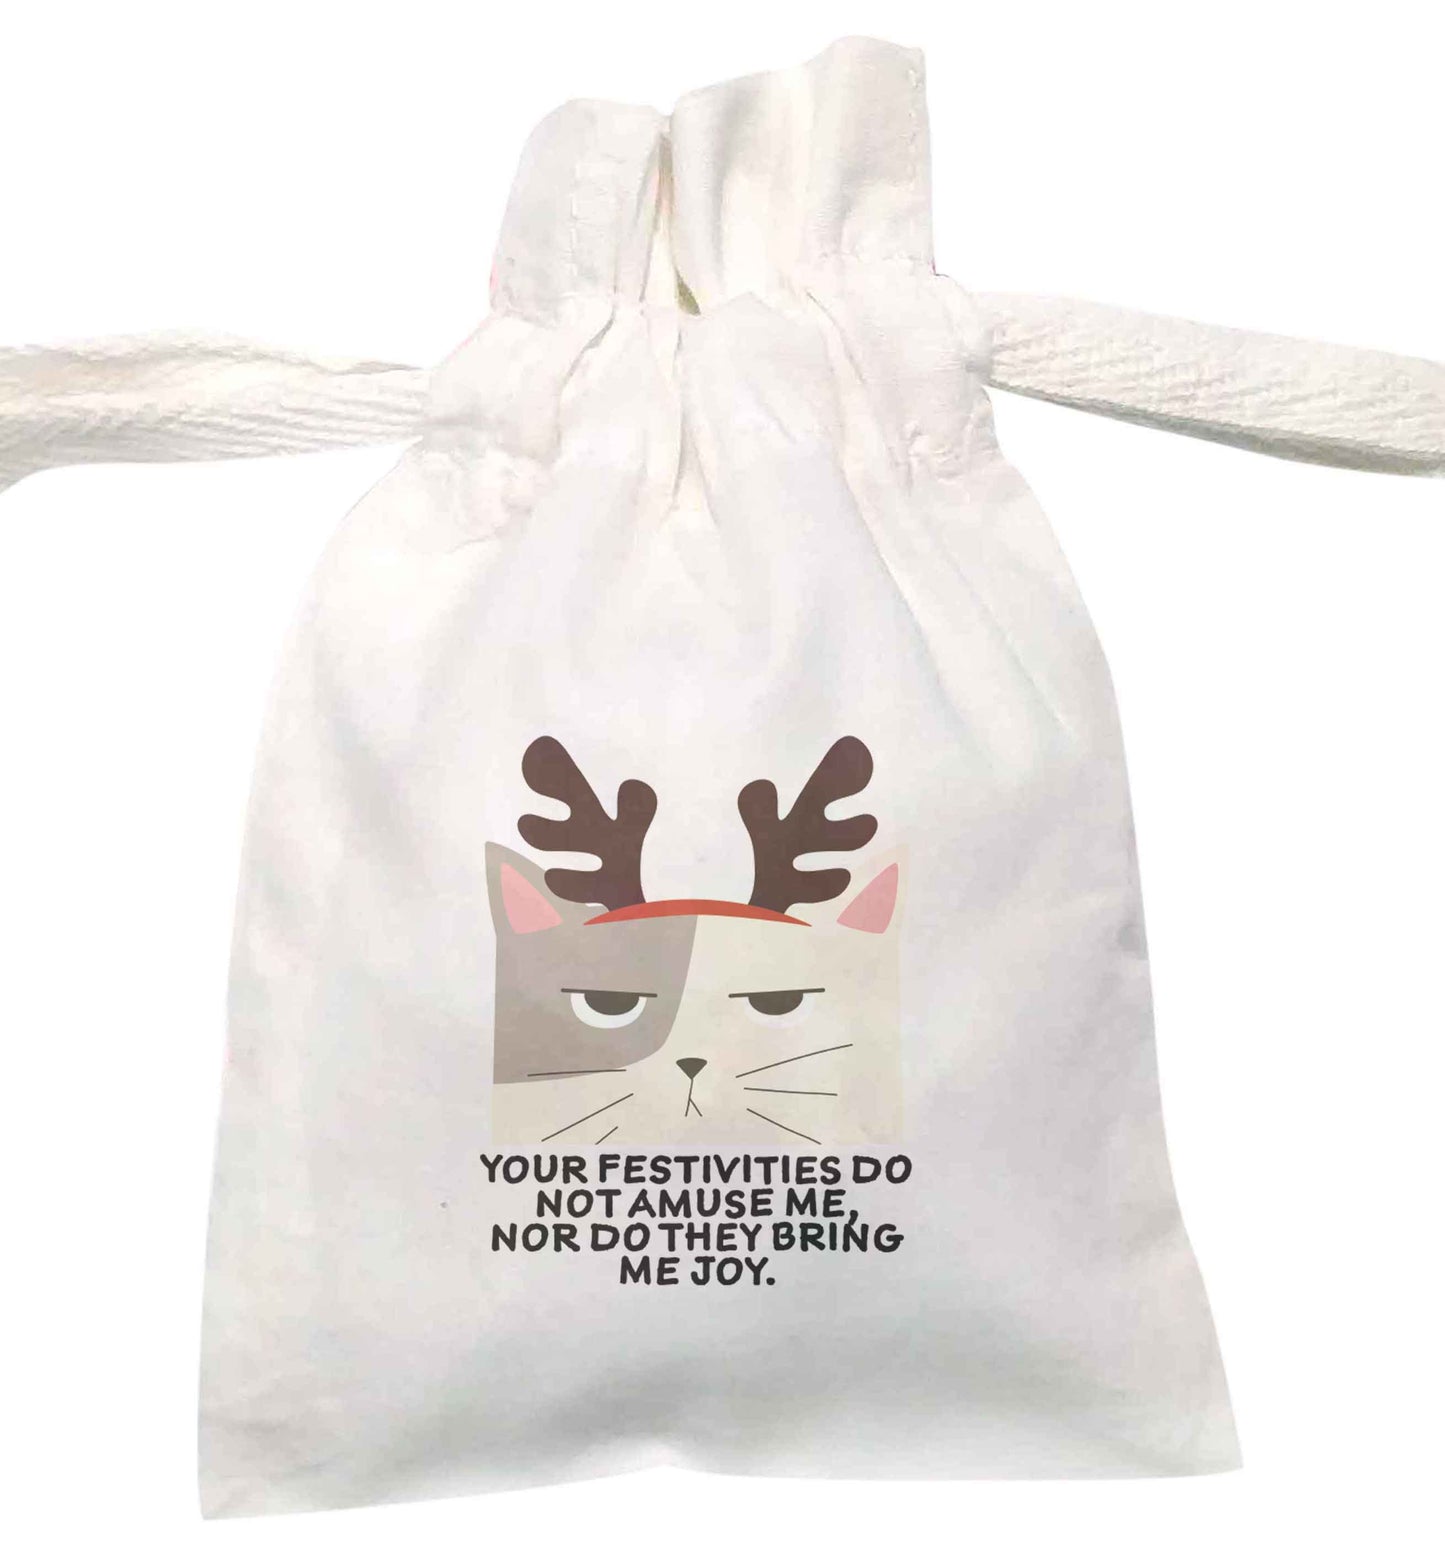 Your festivities do not amuse me nor do they bring me joy | XS - L | Pouch / Drawstring bag / Sack | Organic Cotton | Bulk discounts available!